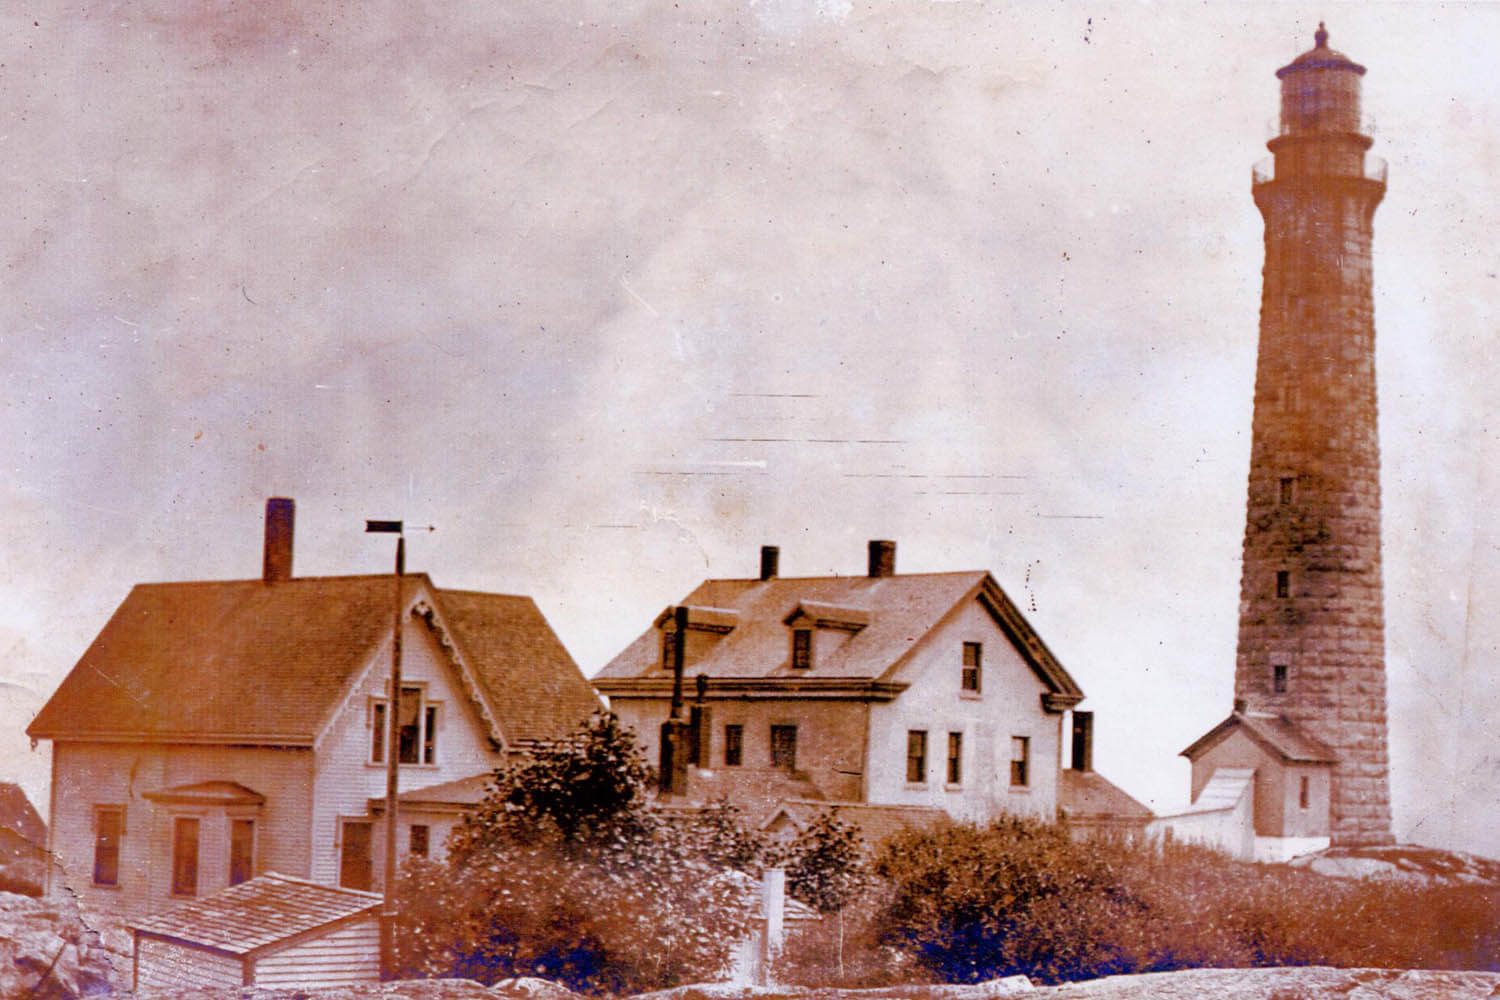 Principal keeper and assistant keeper houses with picket fence and outhouse c.1880.